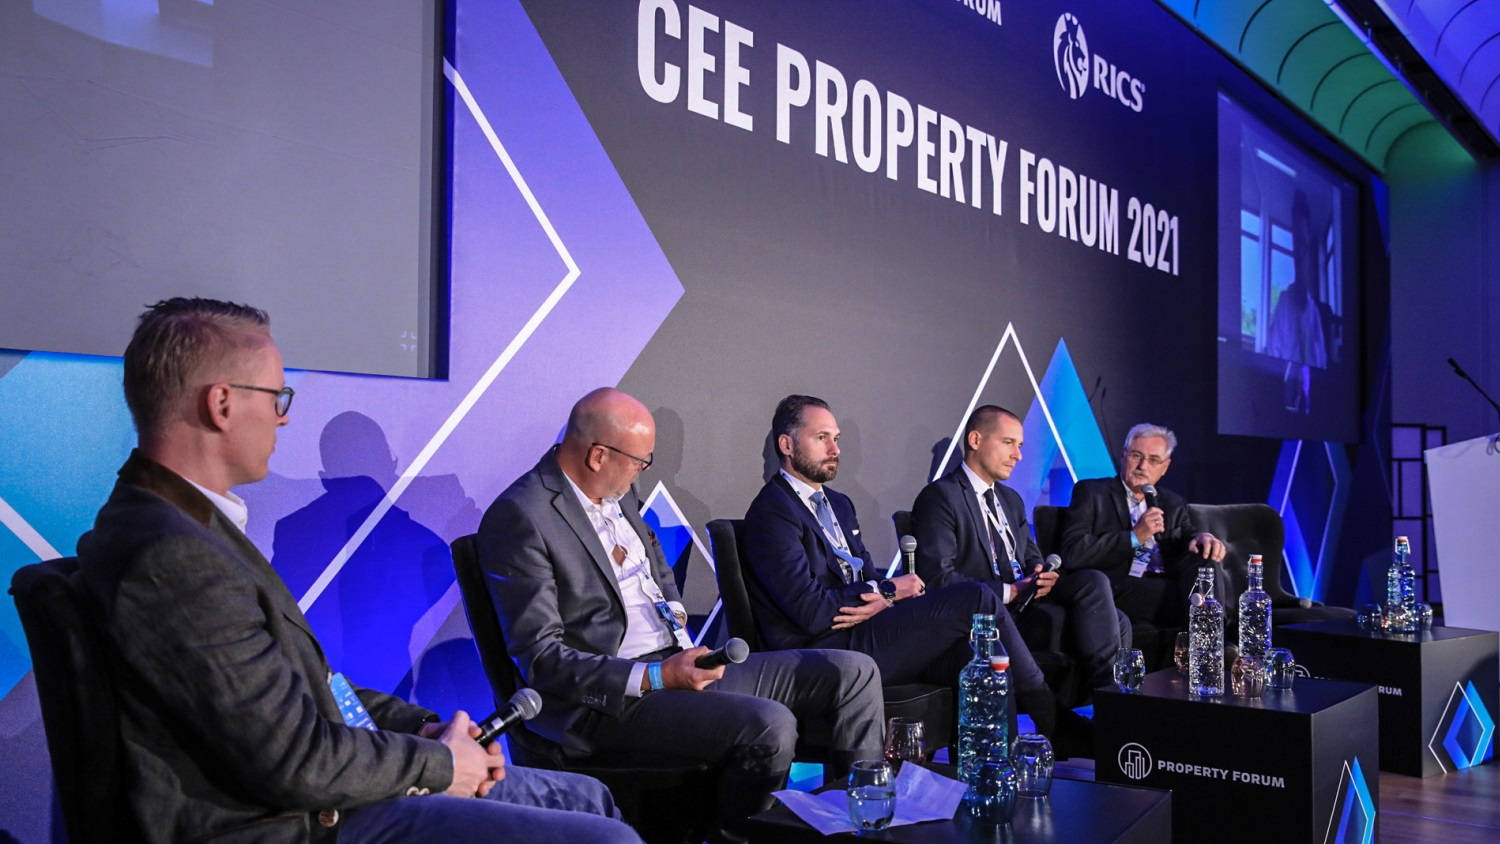 News Article CEE Property Forum CEE Property Forum 2021 conference ESG Property Forum report sustainability